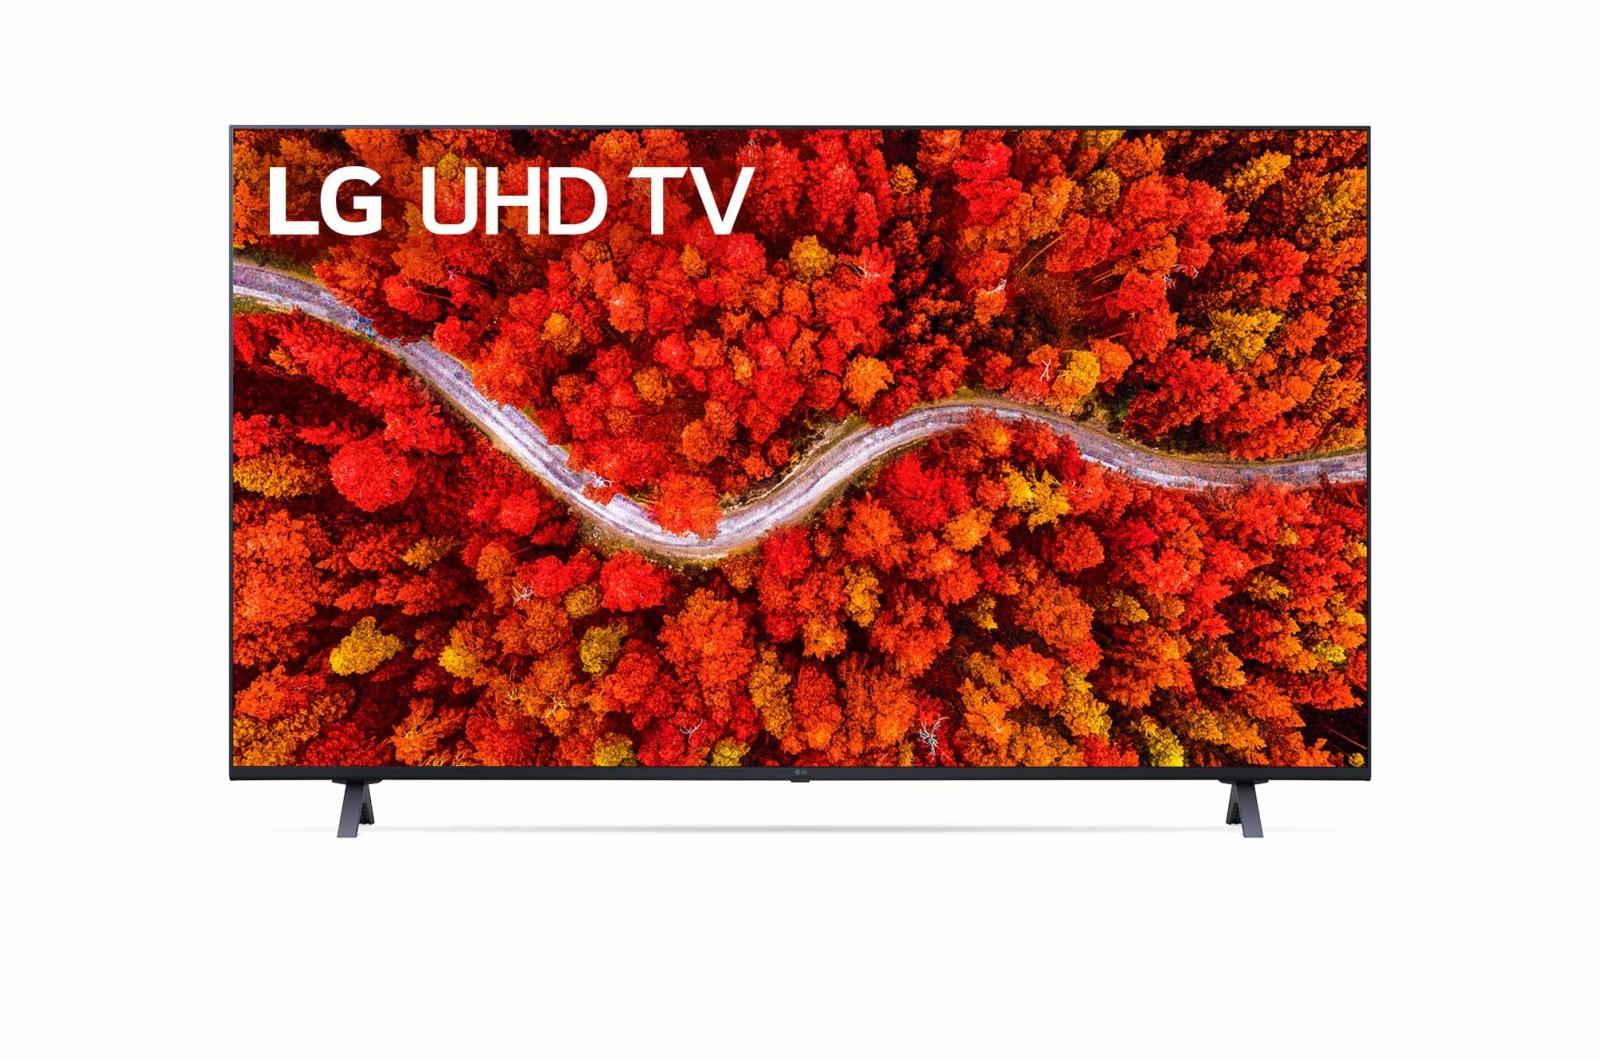 LG 55UP8000PUR TV